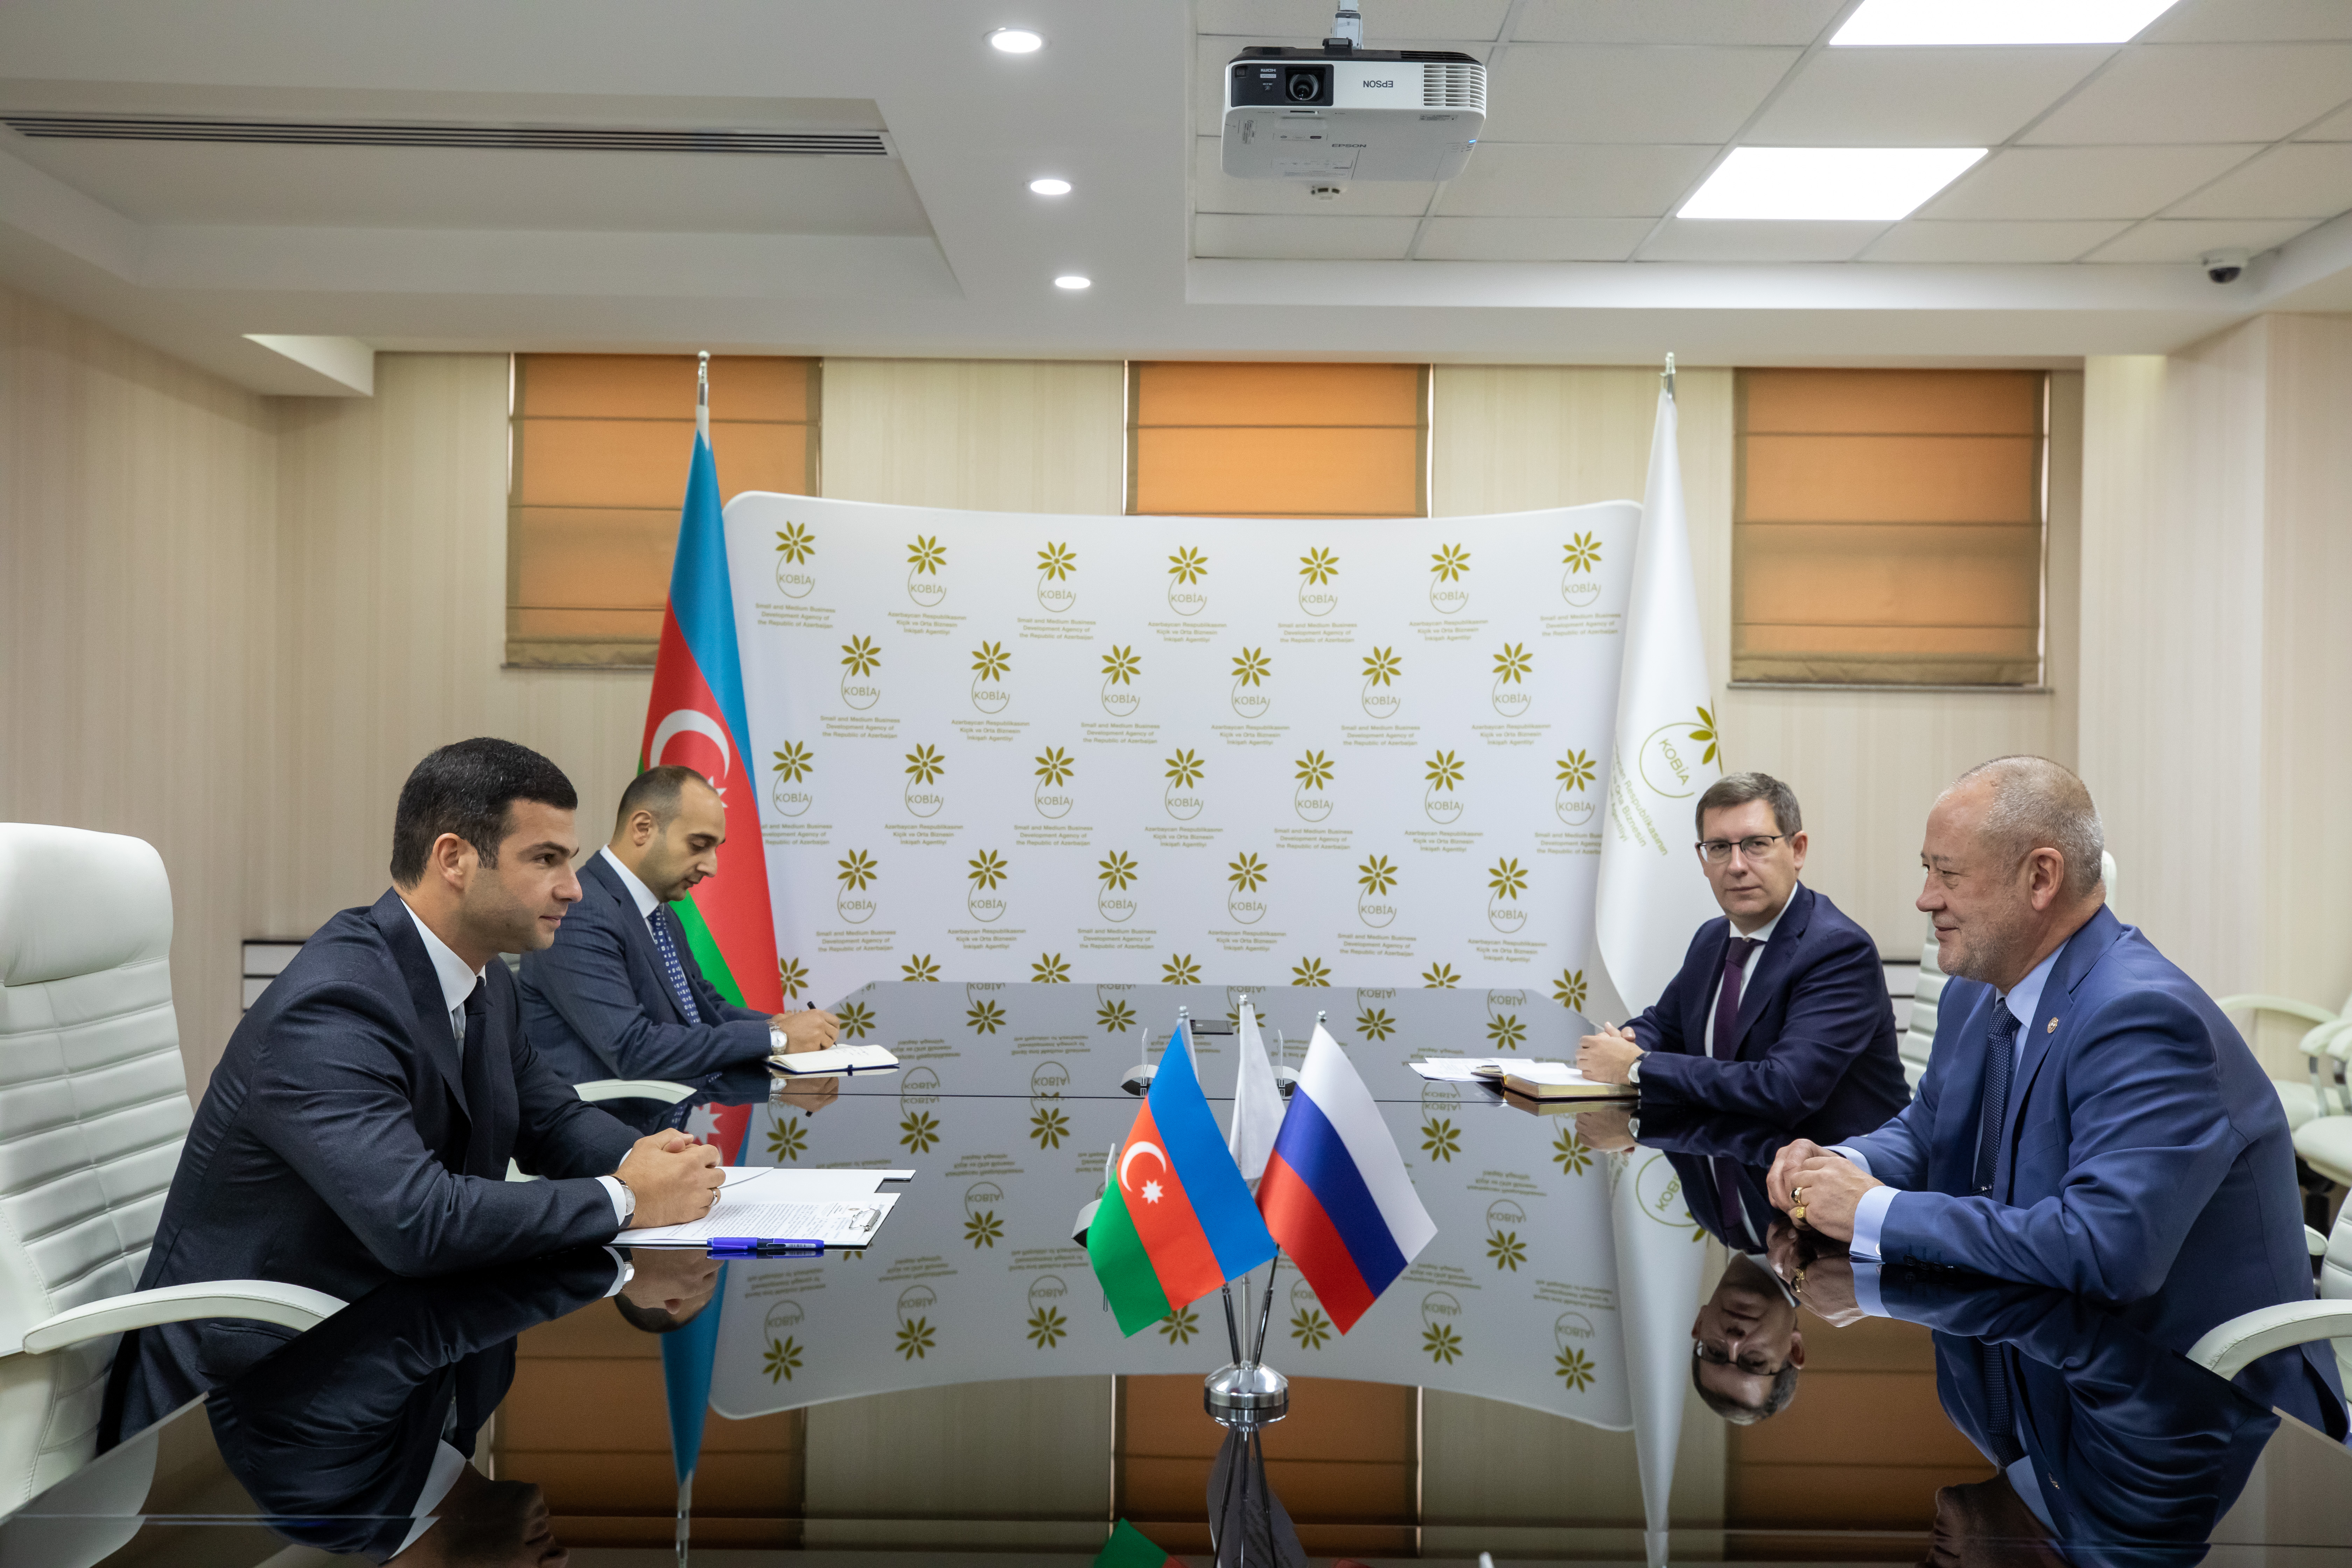 Meeting with permanent representative of Tatarstan in our country